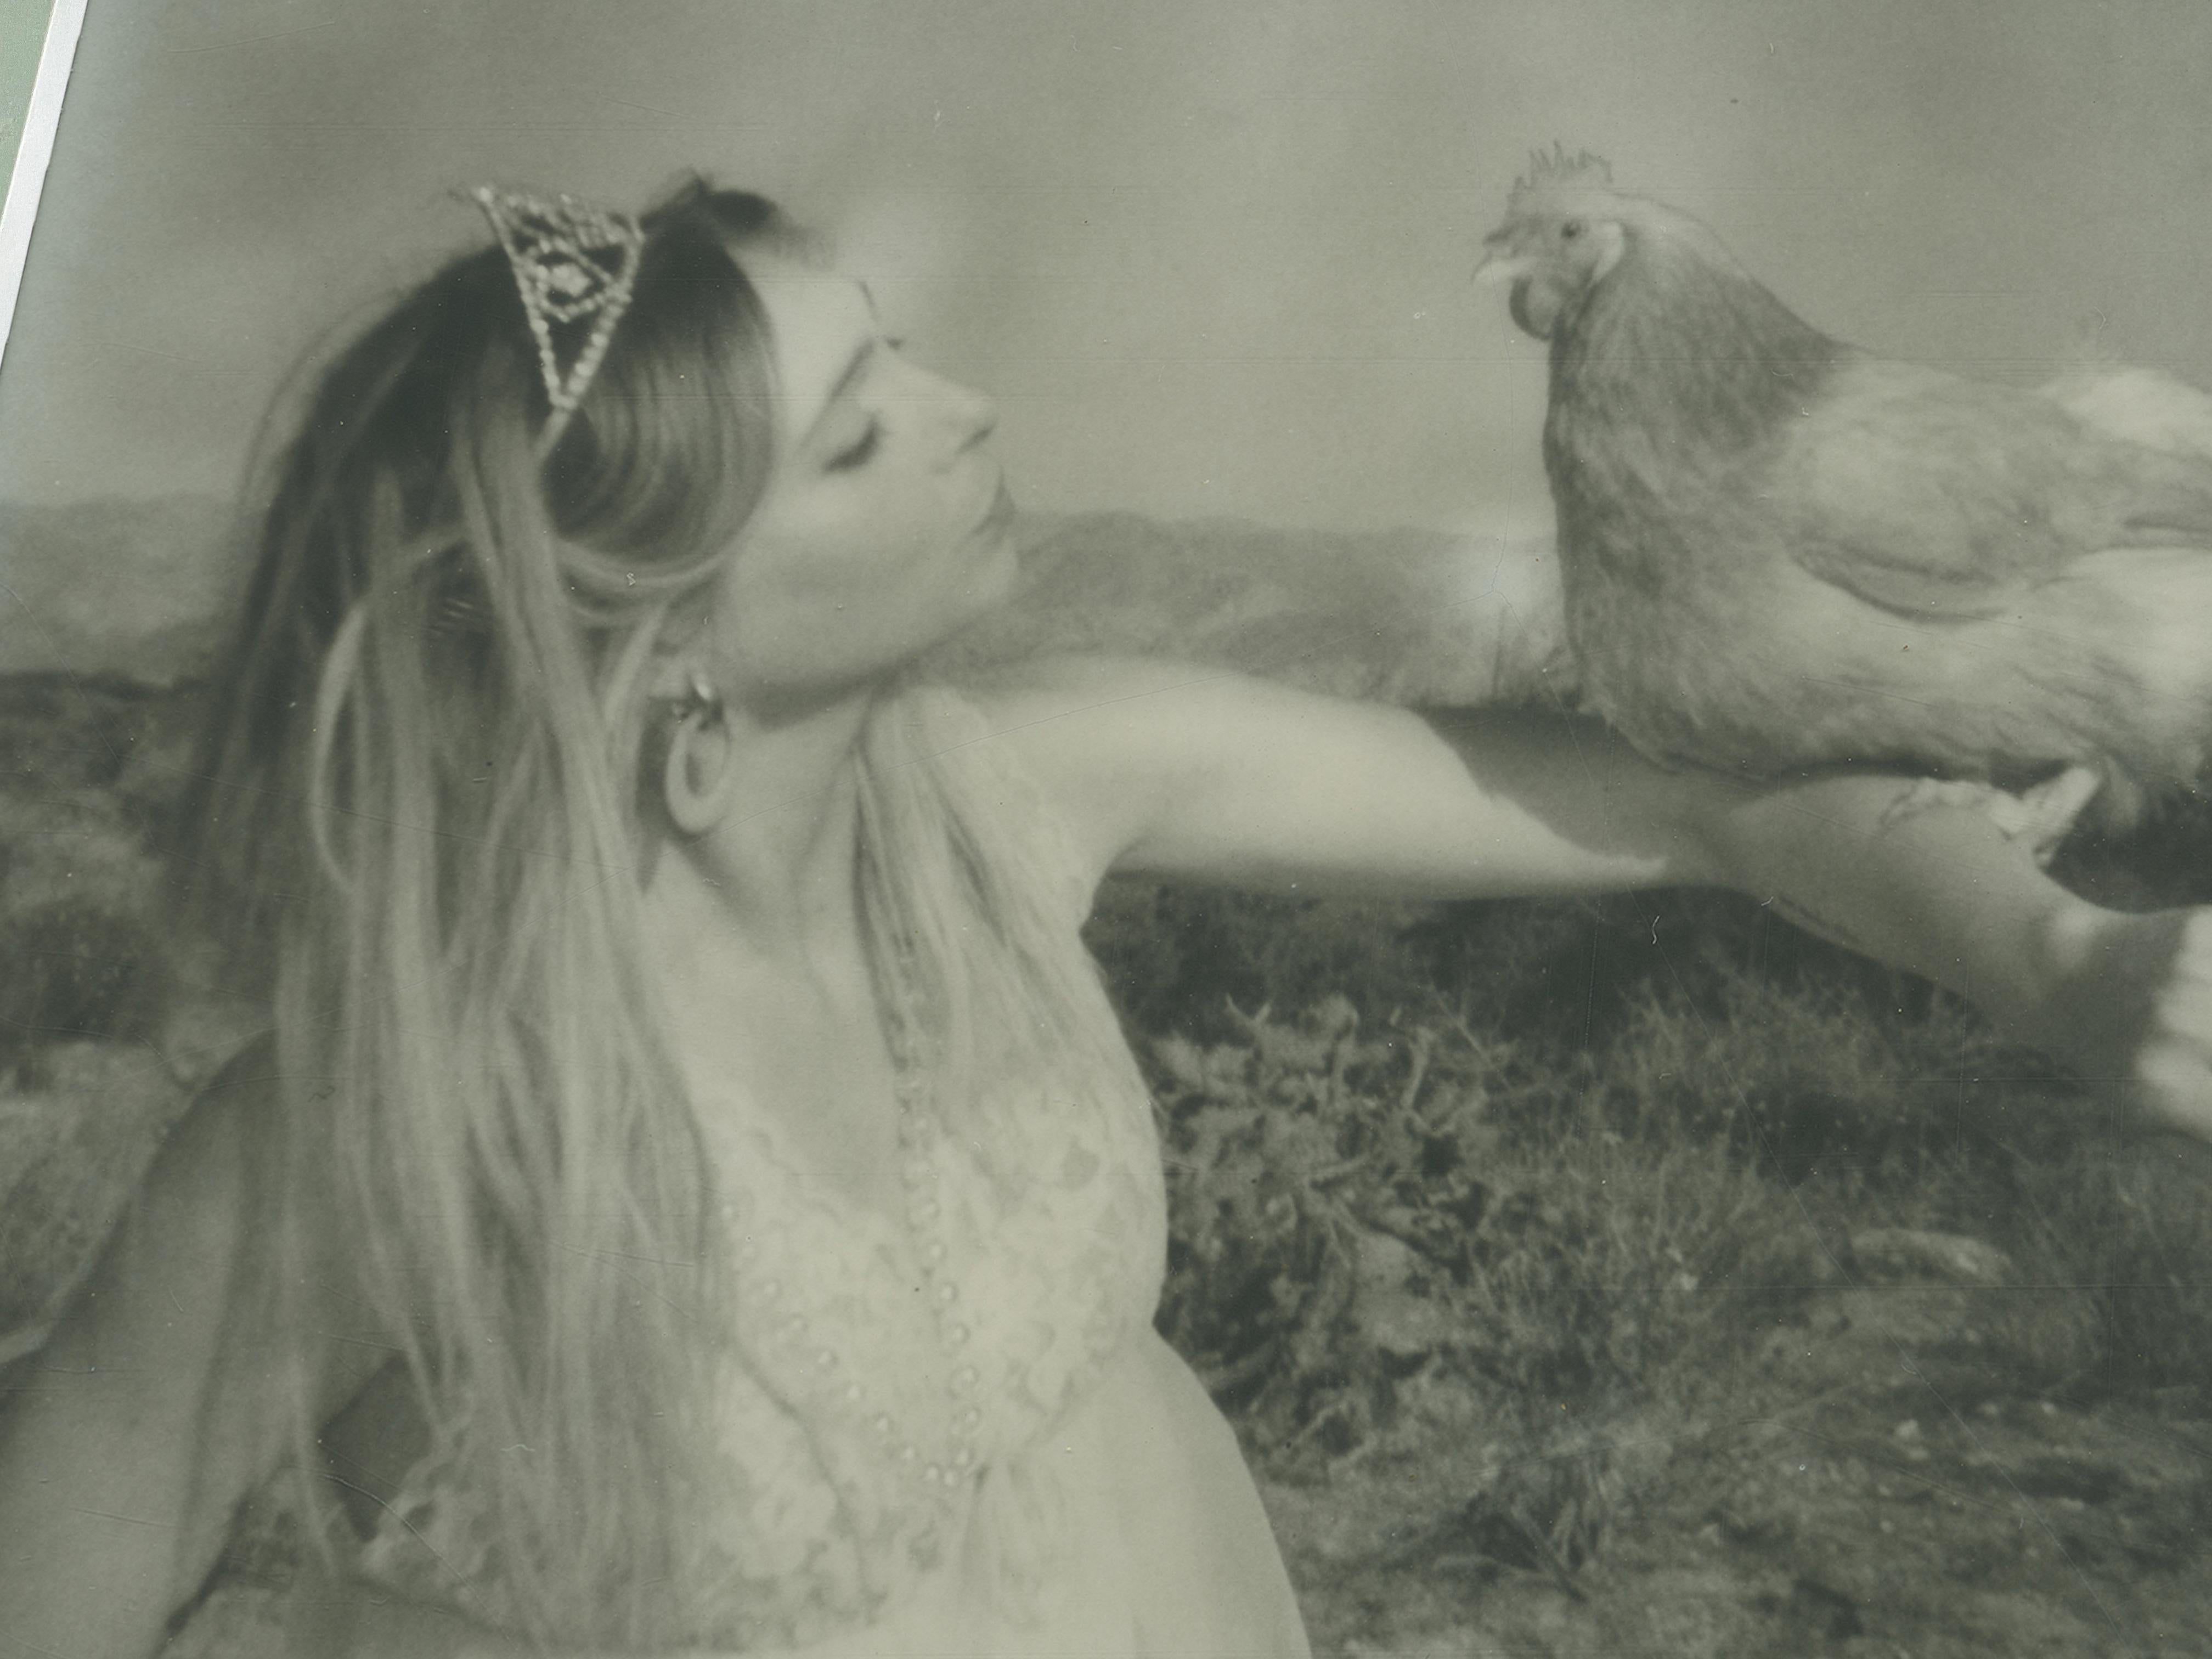 Princess' Kiss (Chicks and Chicks and sometimes Cocks) - 2018

20x20cm, 
Edition of 10 plus 2 Artist Proofs.  
Archival C-Print based on the Polaroid. 
Certificate and signature label. 
Artist inventory 21583. 
Not mounted. 

The works of Stefanie